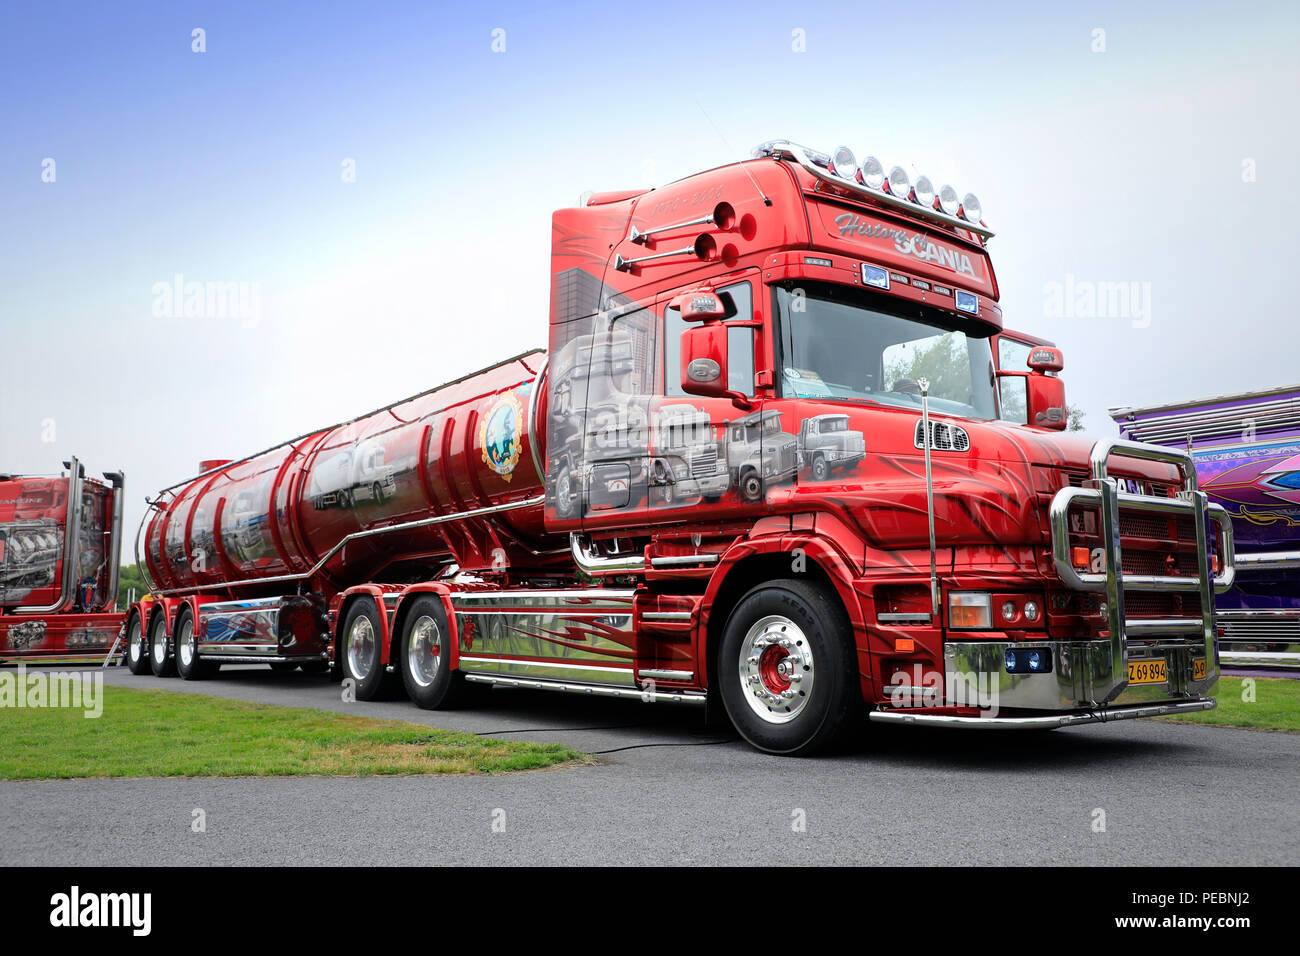 ALAHARMA, FINLAND - AUGUST 10, 2018: Torpedo Scania T164 super truck History of Scania Pouls Bremseservice A/S on Power Truck Show 2018, Finland. Stock Photo